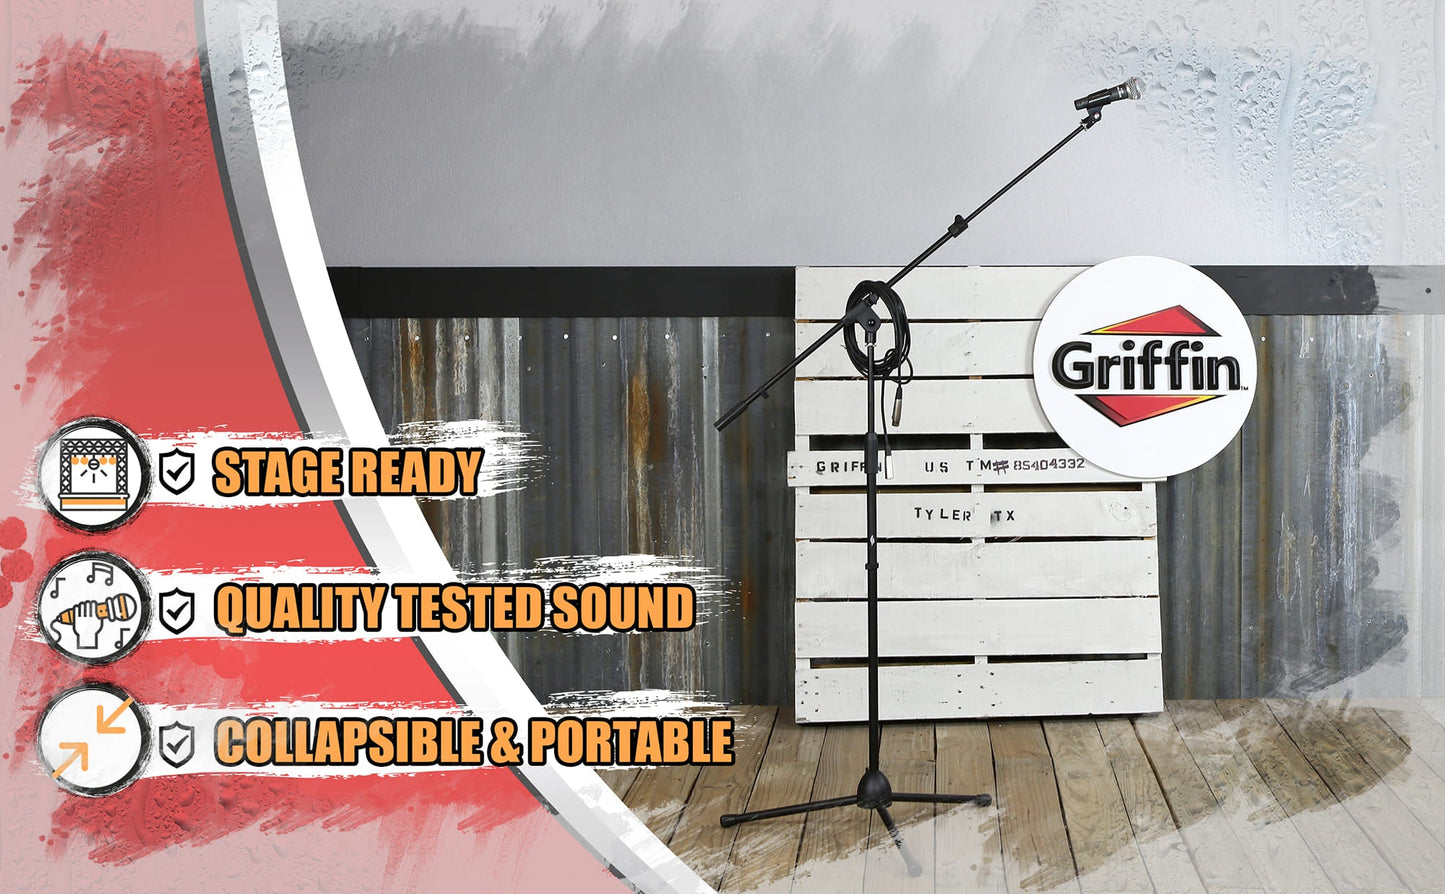 Microphone Stand Studio Package by GRIFFIN - Telescoping Boom Arm Mount & Tripod Holder - Singing Handheld Vocal Microphone, 20FT XLR Mic Cable